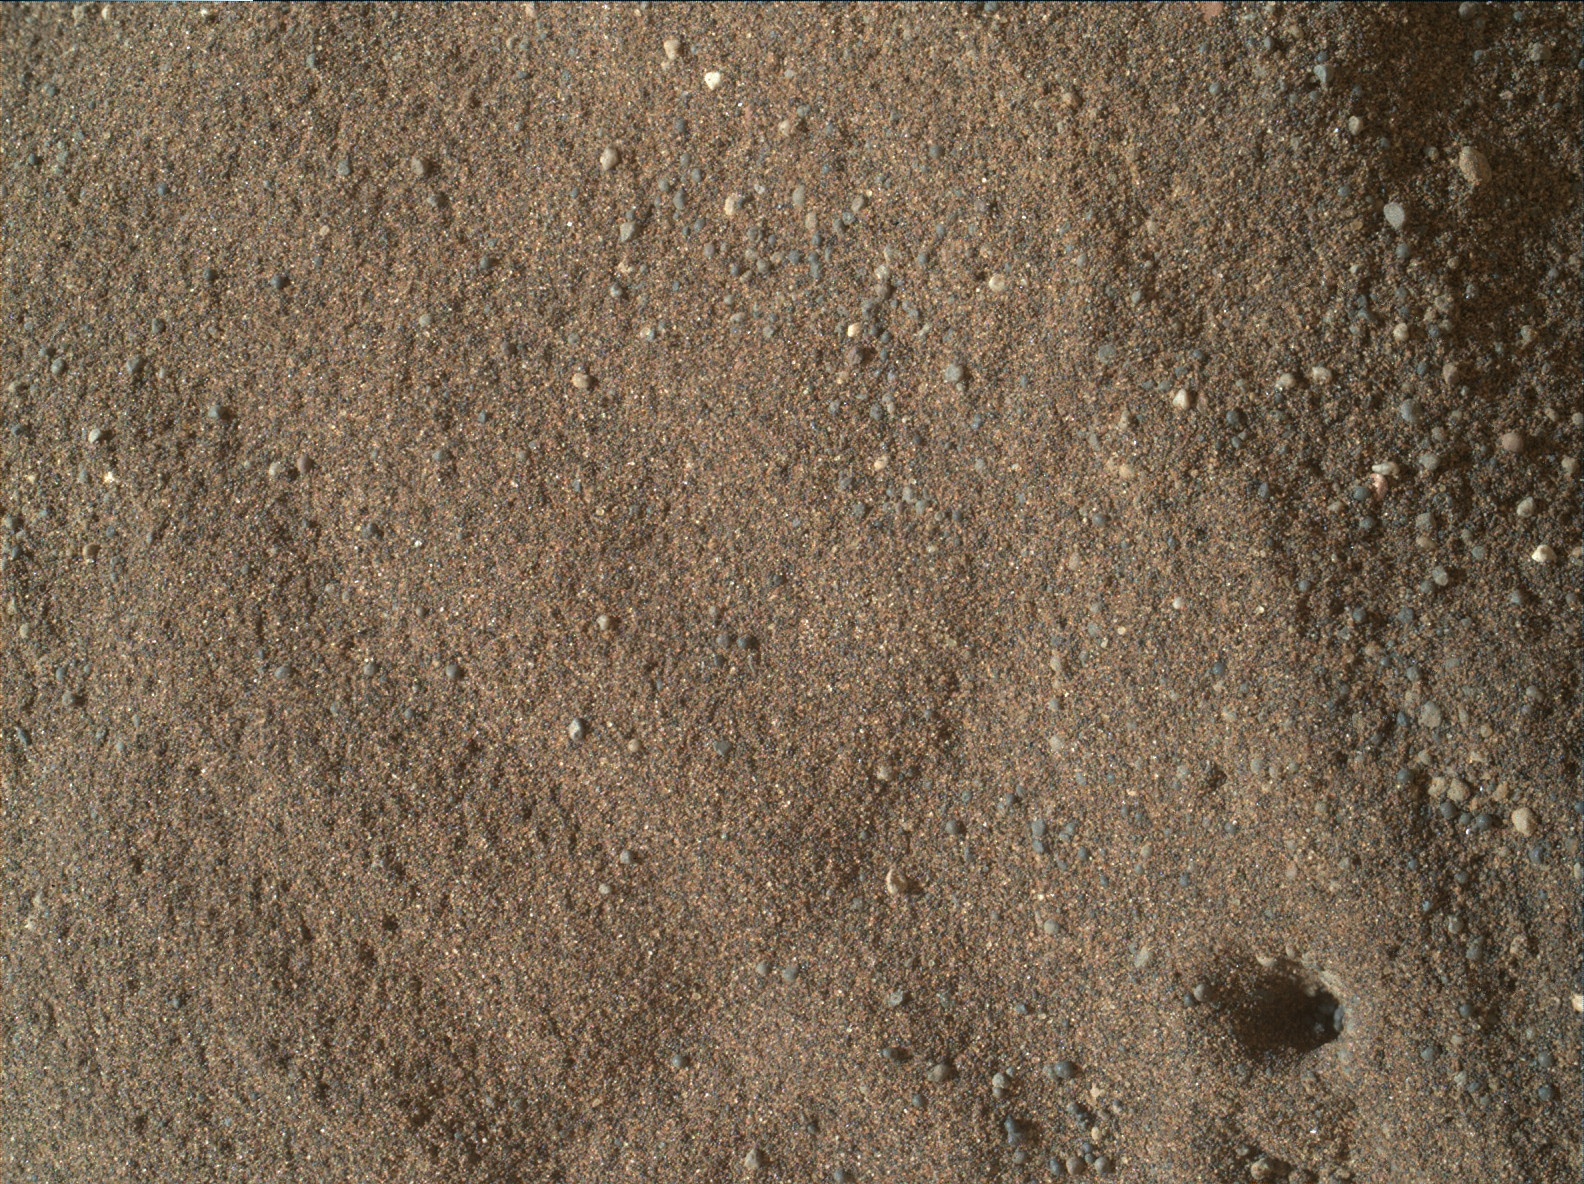 Nasa's Mars rover Curiosity acquired this image using its Mars Hand Lens Imager (MAHLI) on Sol 1689